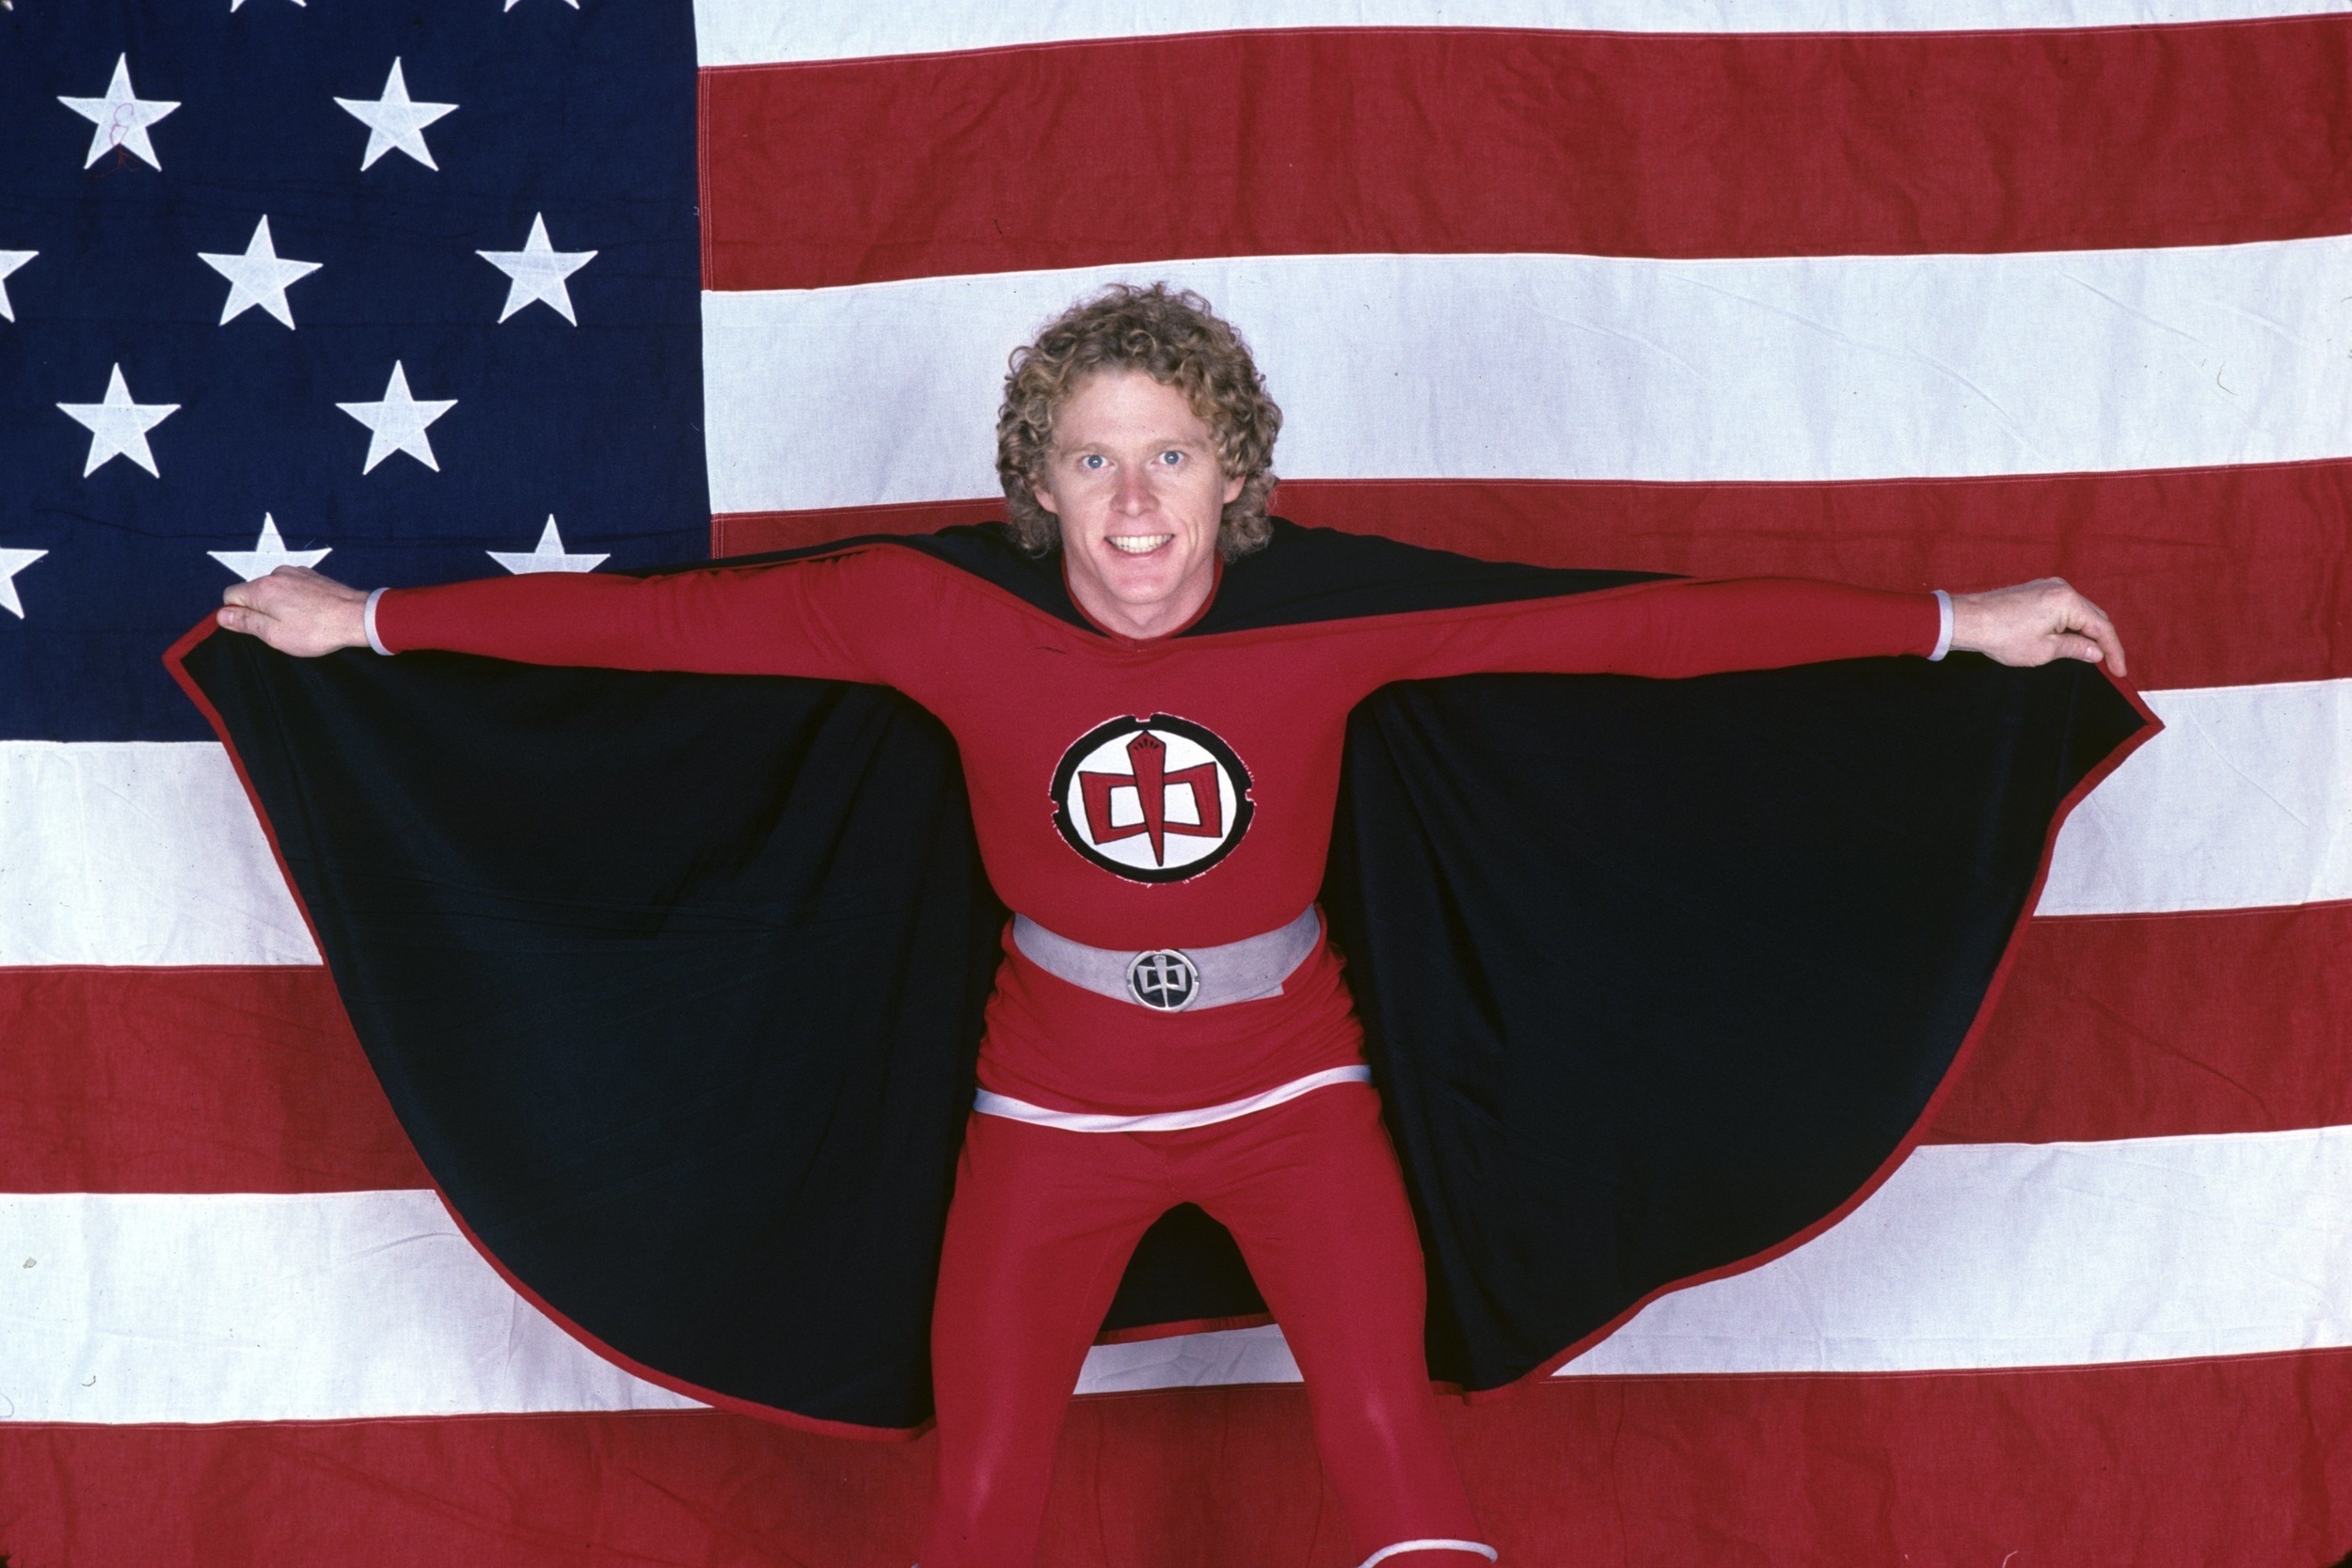 <p>There are plenty of superhero shows on network television, cable, and streaming services. Yet, it would be fun to revisit an everyman-turned-superhero like Ralph (originally played by William Katt). Hopefully, we could get an updated version of that famed<a href="https://www.youtube.com/watch?v=B4JCehDOy54"> theme song.</a> Now, it should be known that the idea of a <em>Greatest </em><em>American </em><em>Hero </em>remake has been tossed around for some time, including one with a female lead that <a href="https://www.denofgeek.com/tv/the-greatest-american-hero-reboot-not-picked-up-by-abc/#:~:text=The%20gender%2Dswapped%20version%20of,t%20going%20ahead%20at%20ABC.&text=When%20you%20consider%20that%20the,becomes%20quite%20a%20television%20pedigree.">was nearly green-lit.</a> </p><p><a href='https://www.msn.com/en-us/community/channel/vid-cj9pqbr0vn9in2b6ddcd8sfgpfq6x6utp44fssrv6mc2gtybw0us'>Follow us on MSN to see more of our exclusive entertainment content.</a></p>